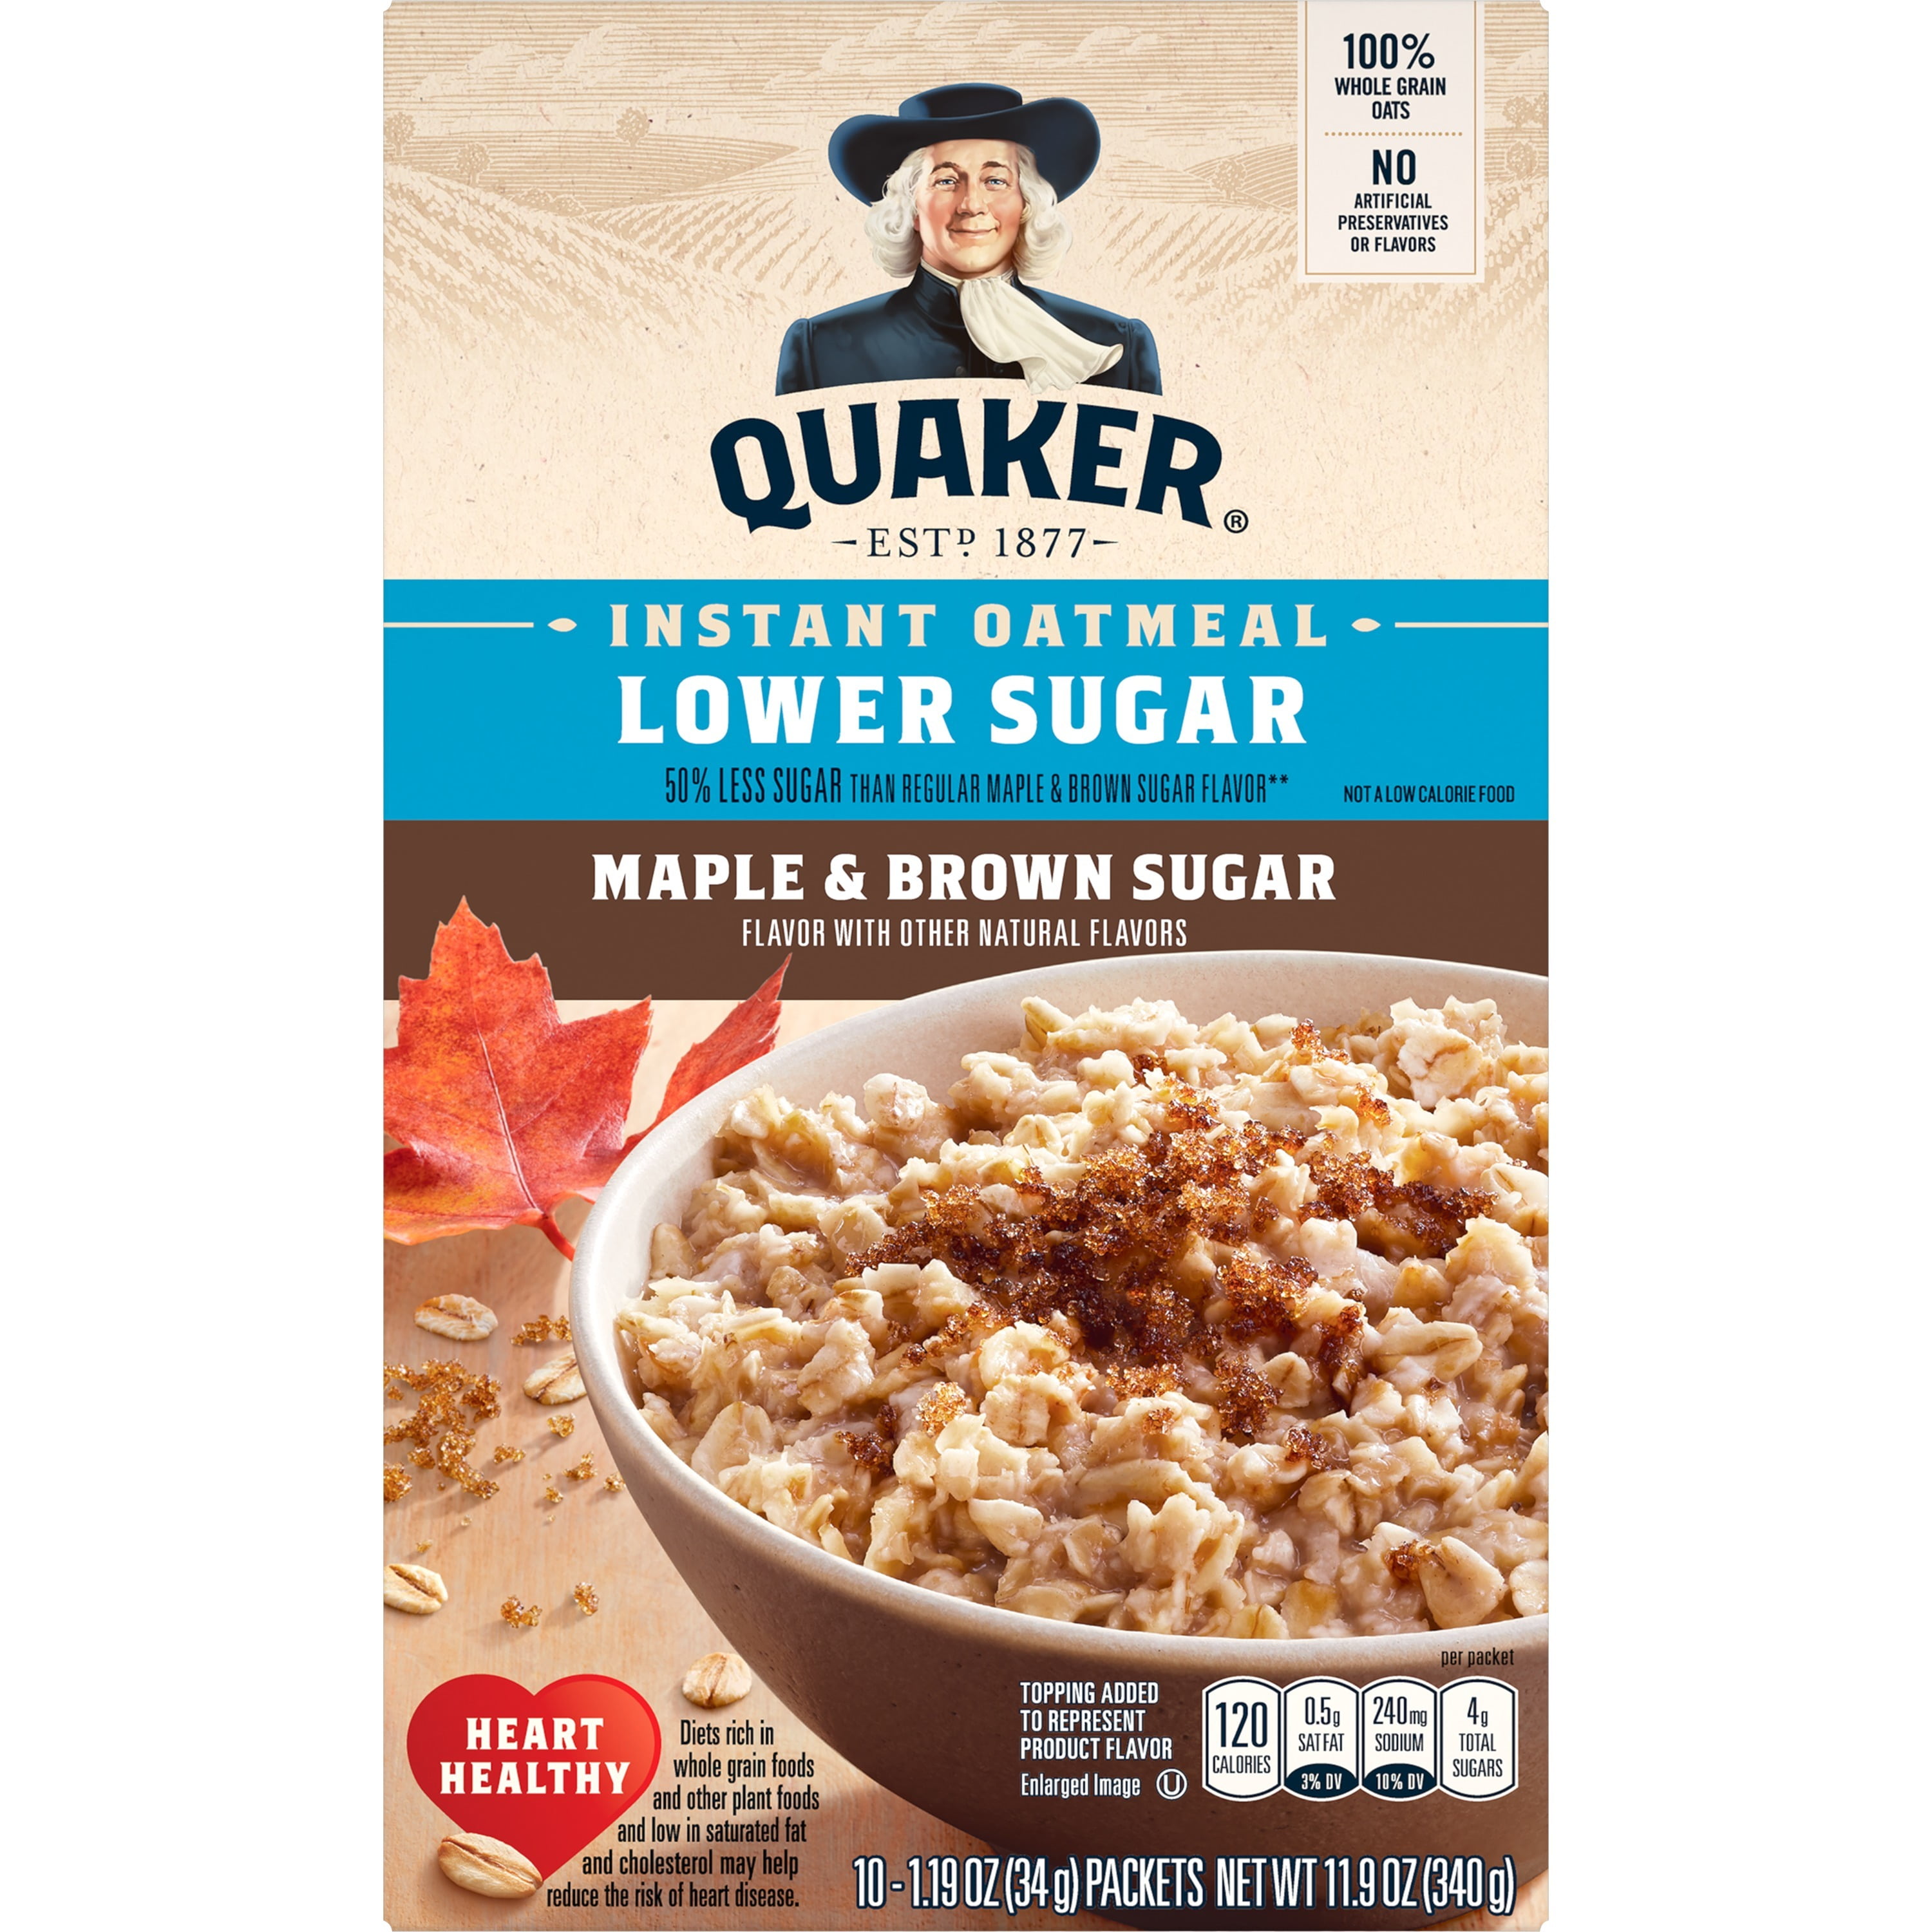 Save on Quaker Protein Instant Oatmeal Banana Nut - 6 ct Order Online  Delivery